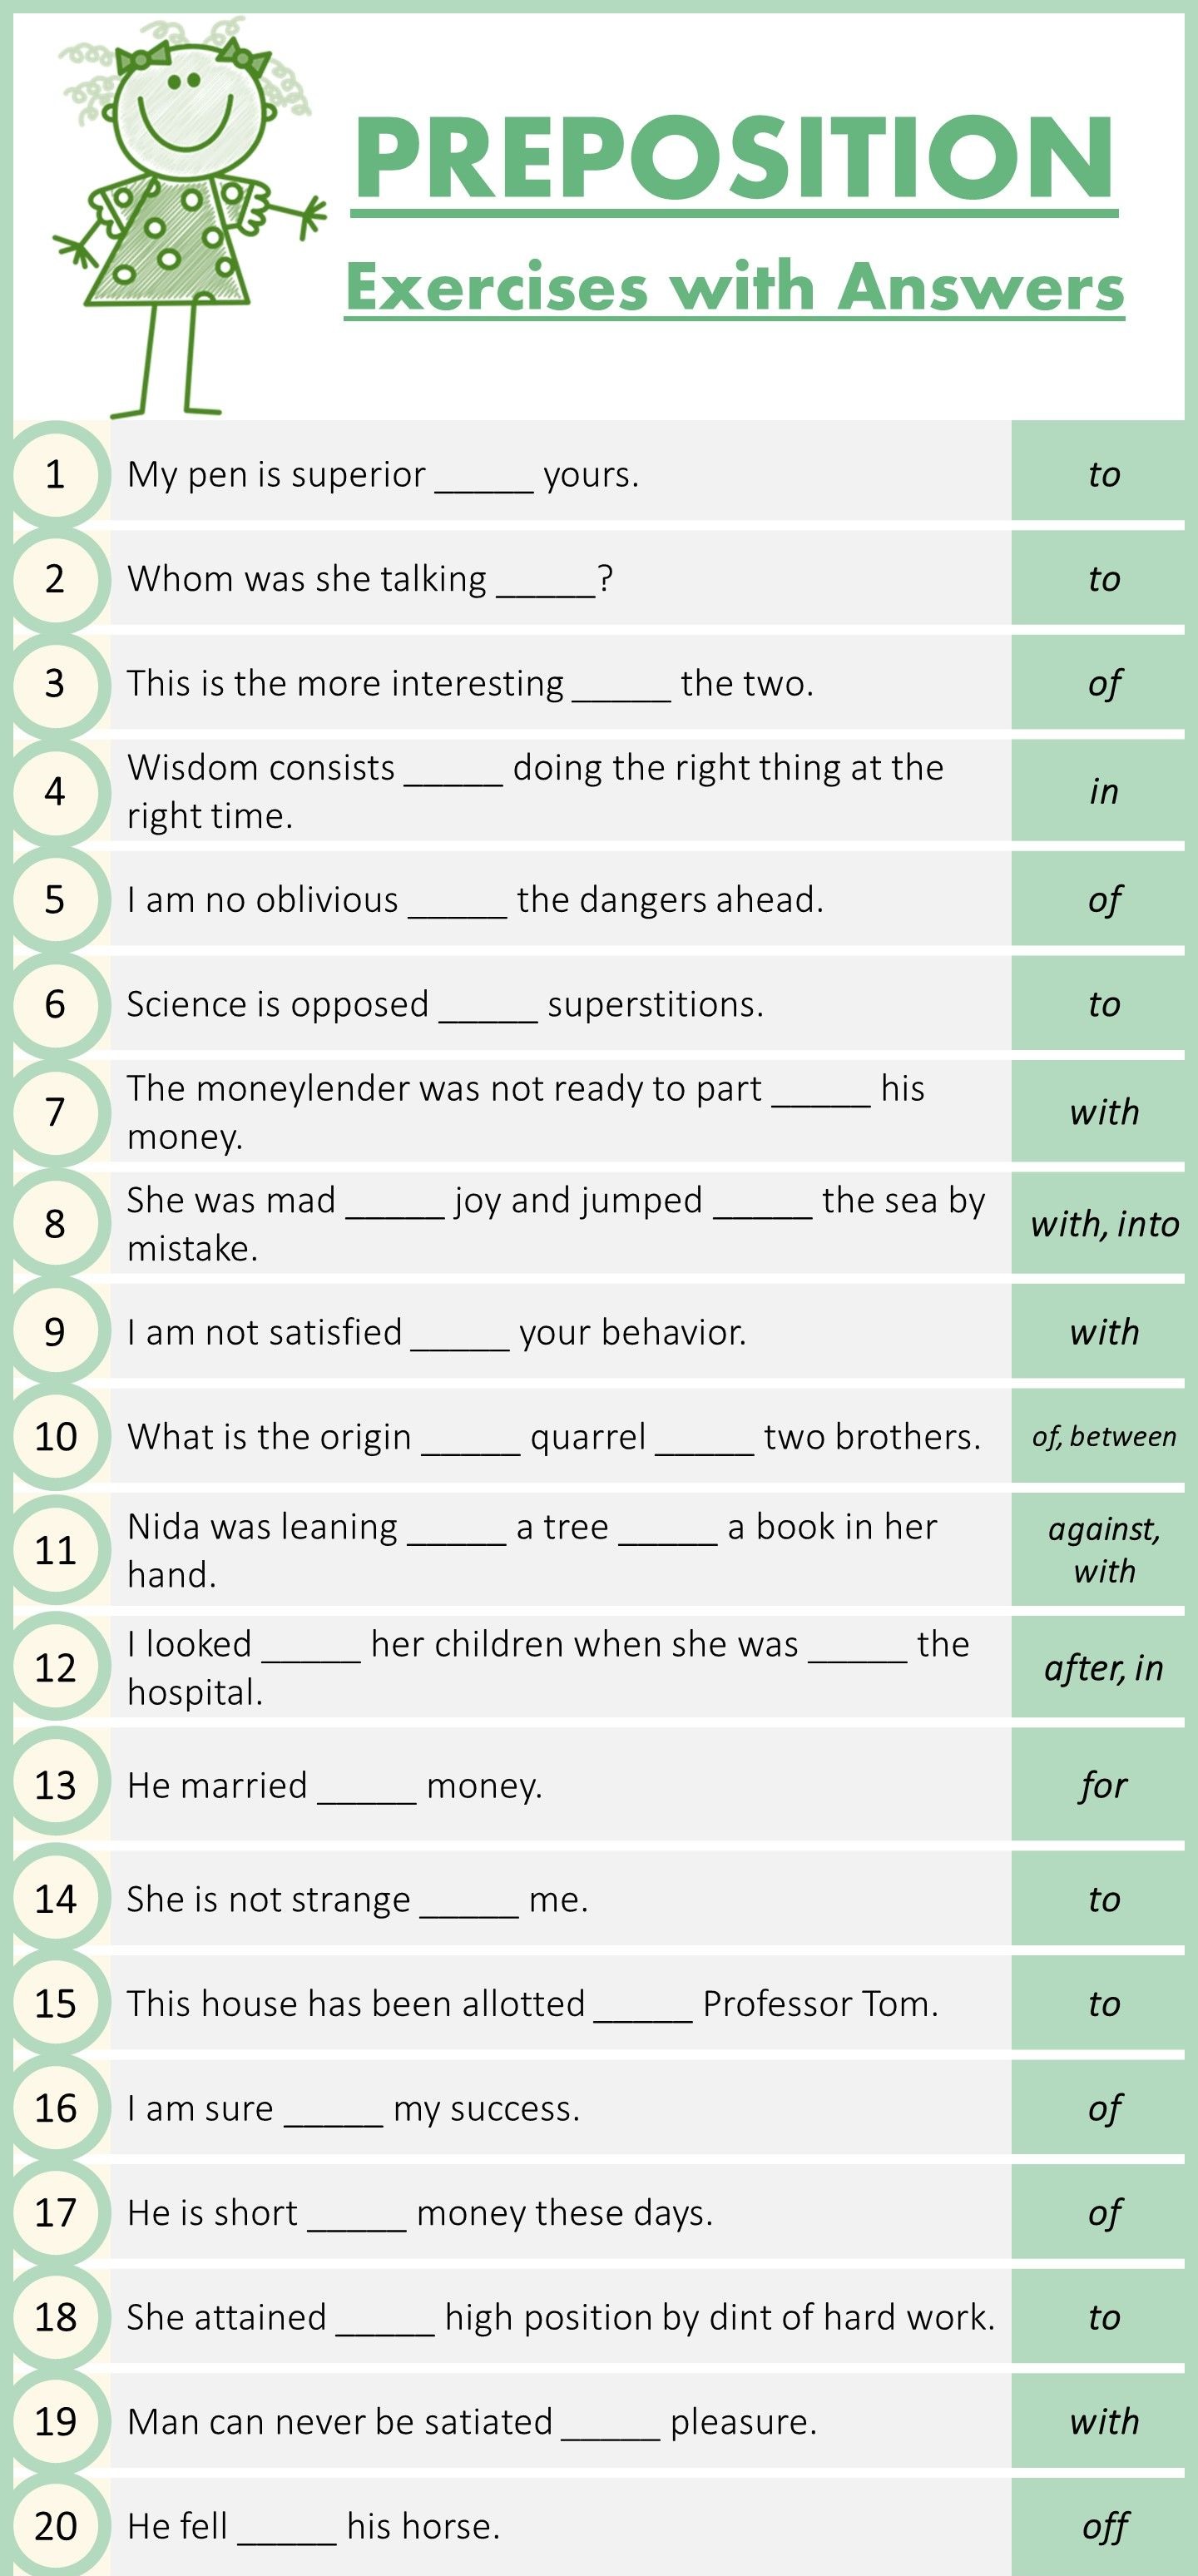 preposition-worksheet-for-class-6-icse-worksheet-today